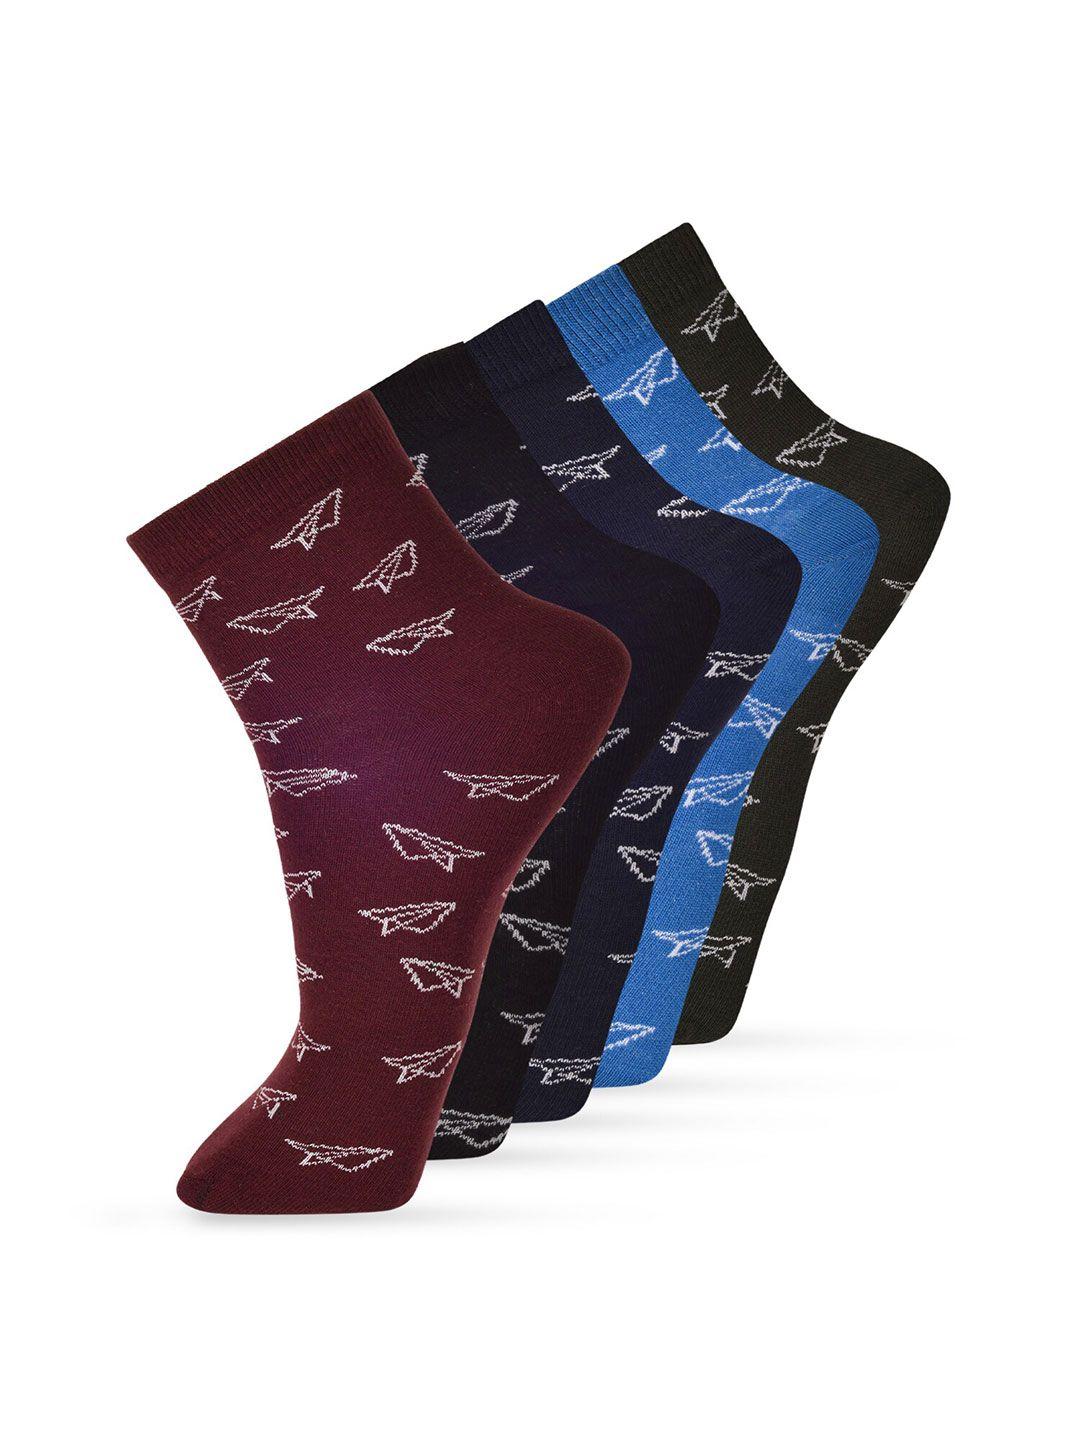 frenchie-men-pack-of-5-assorted-pattarned-cotton-ankle-length-socks